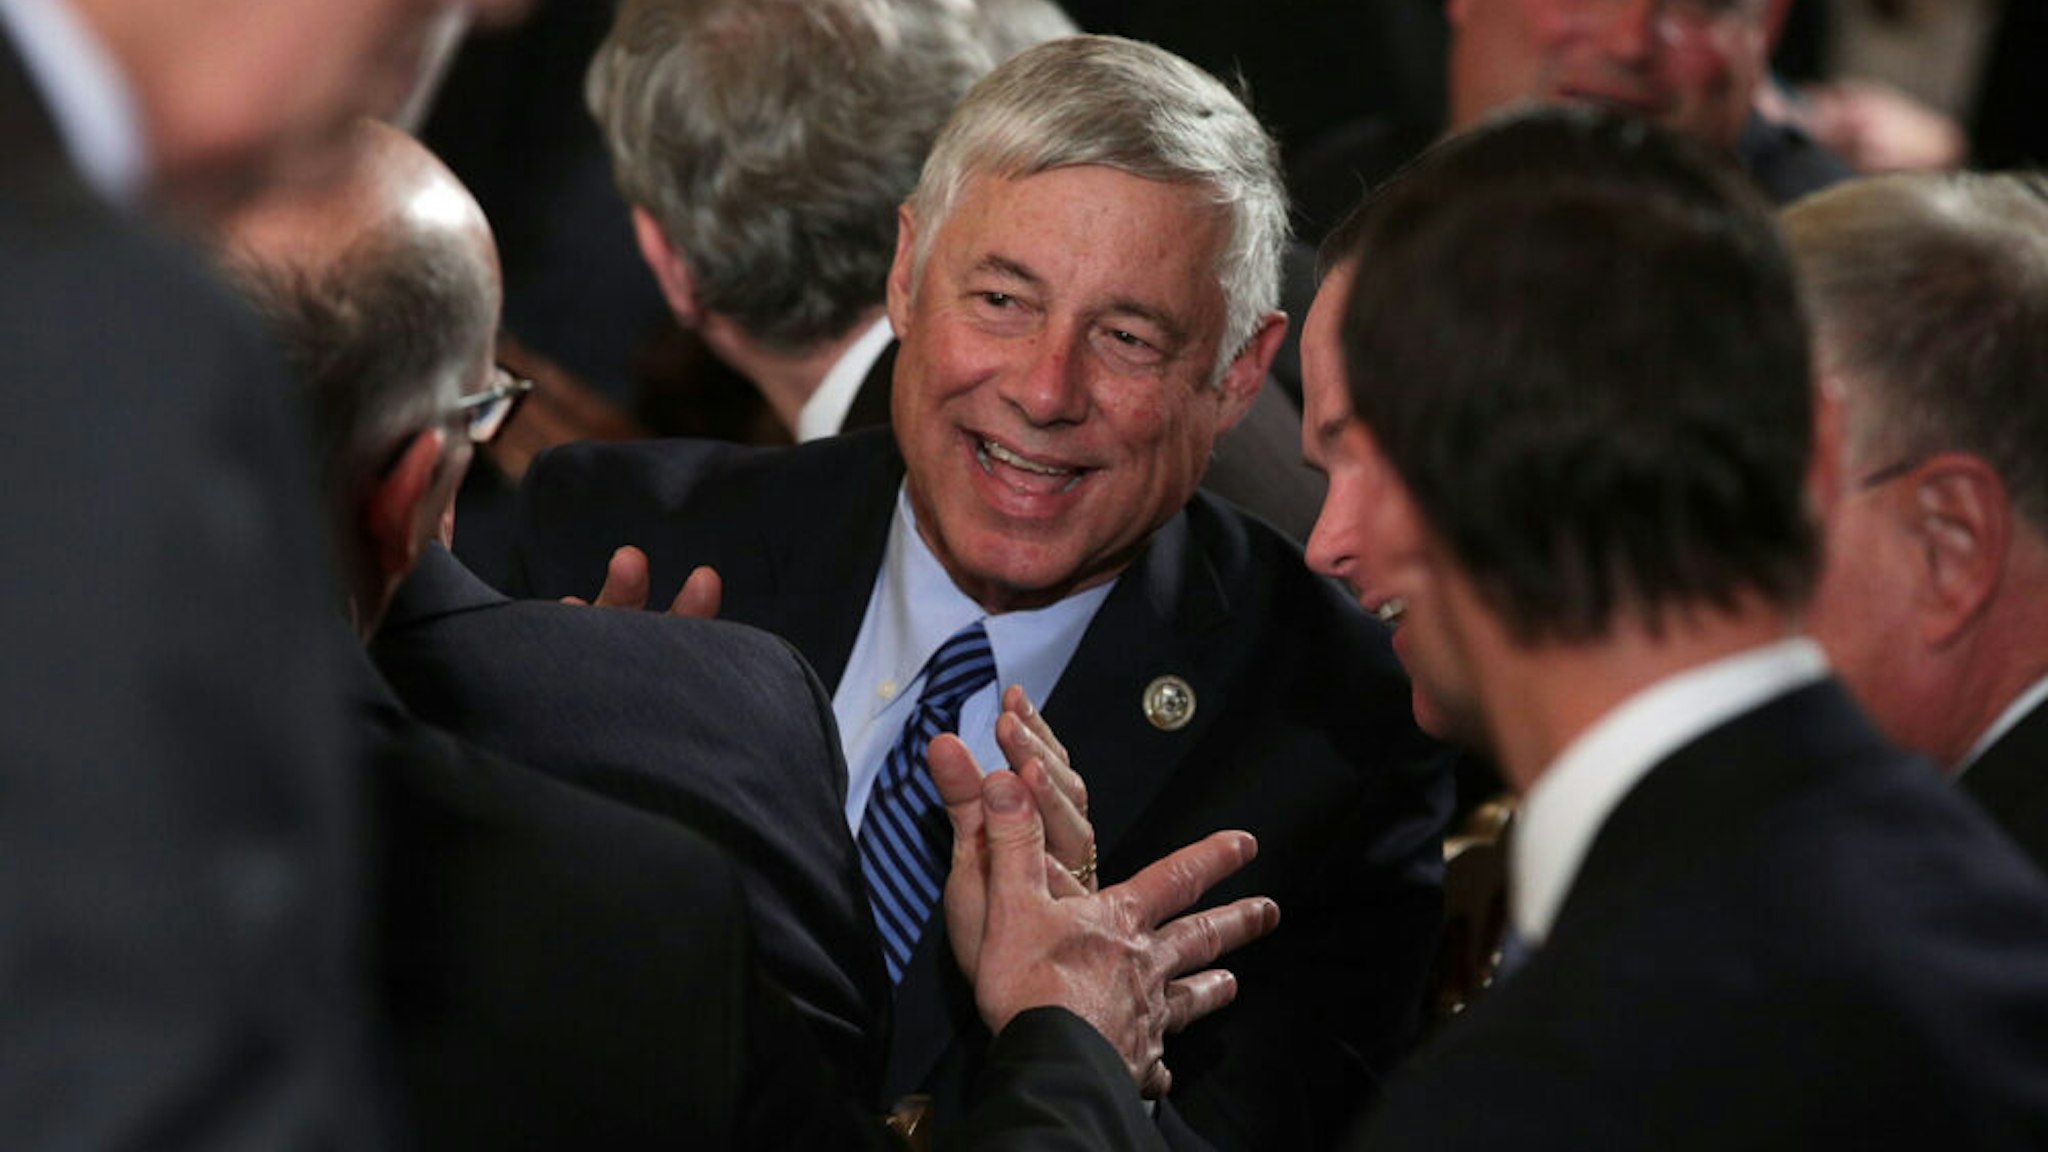 WASHINGTON, DC - OCTOBER 26: U.S. Rep. Fred Upton (R-MI) (C) and other guests wait for the beginning of an event highlighting the opioid crisis in the U.S. October 26, 2017 in the East Room of the White House in Washington, DC. Trump plans to authorize the Department of Health and Human Services to declare a nationwide public health emergency in an effort to reduce the number of opioid overdose deaths across the nation.